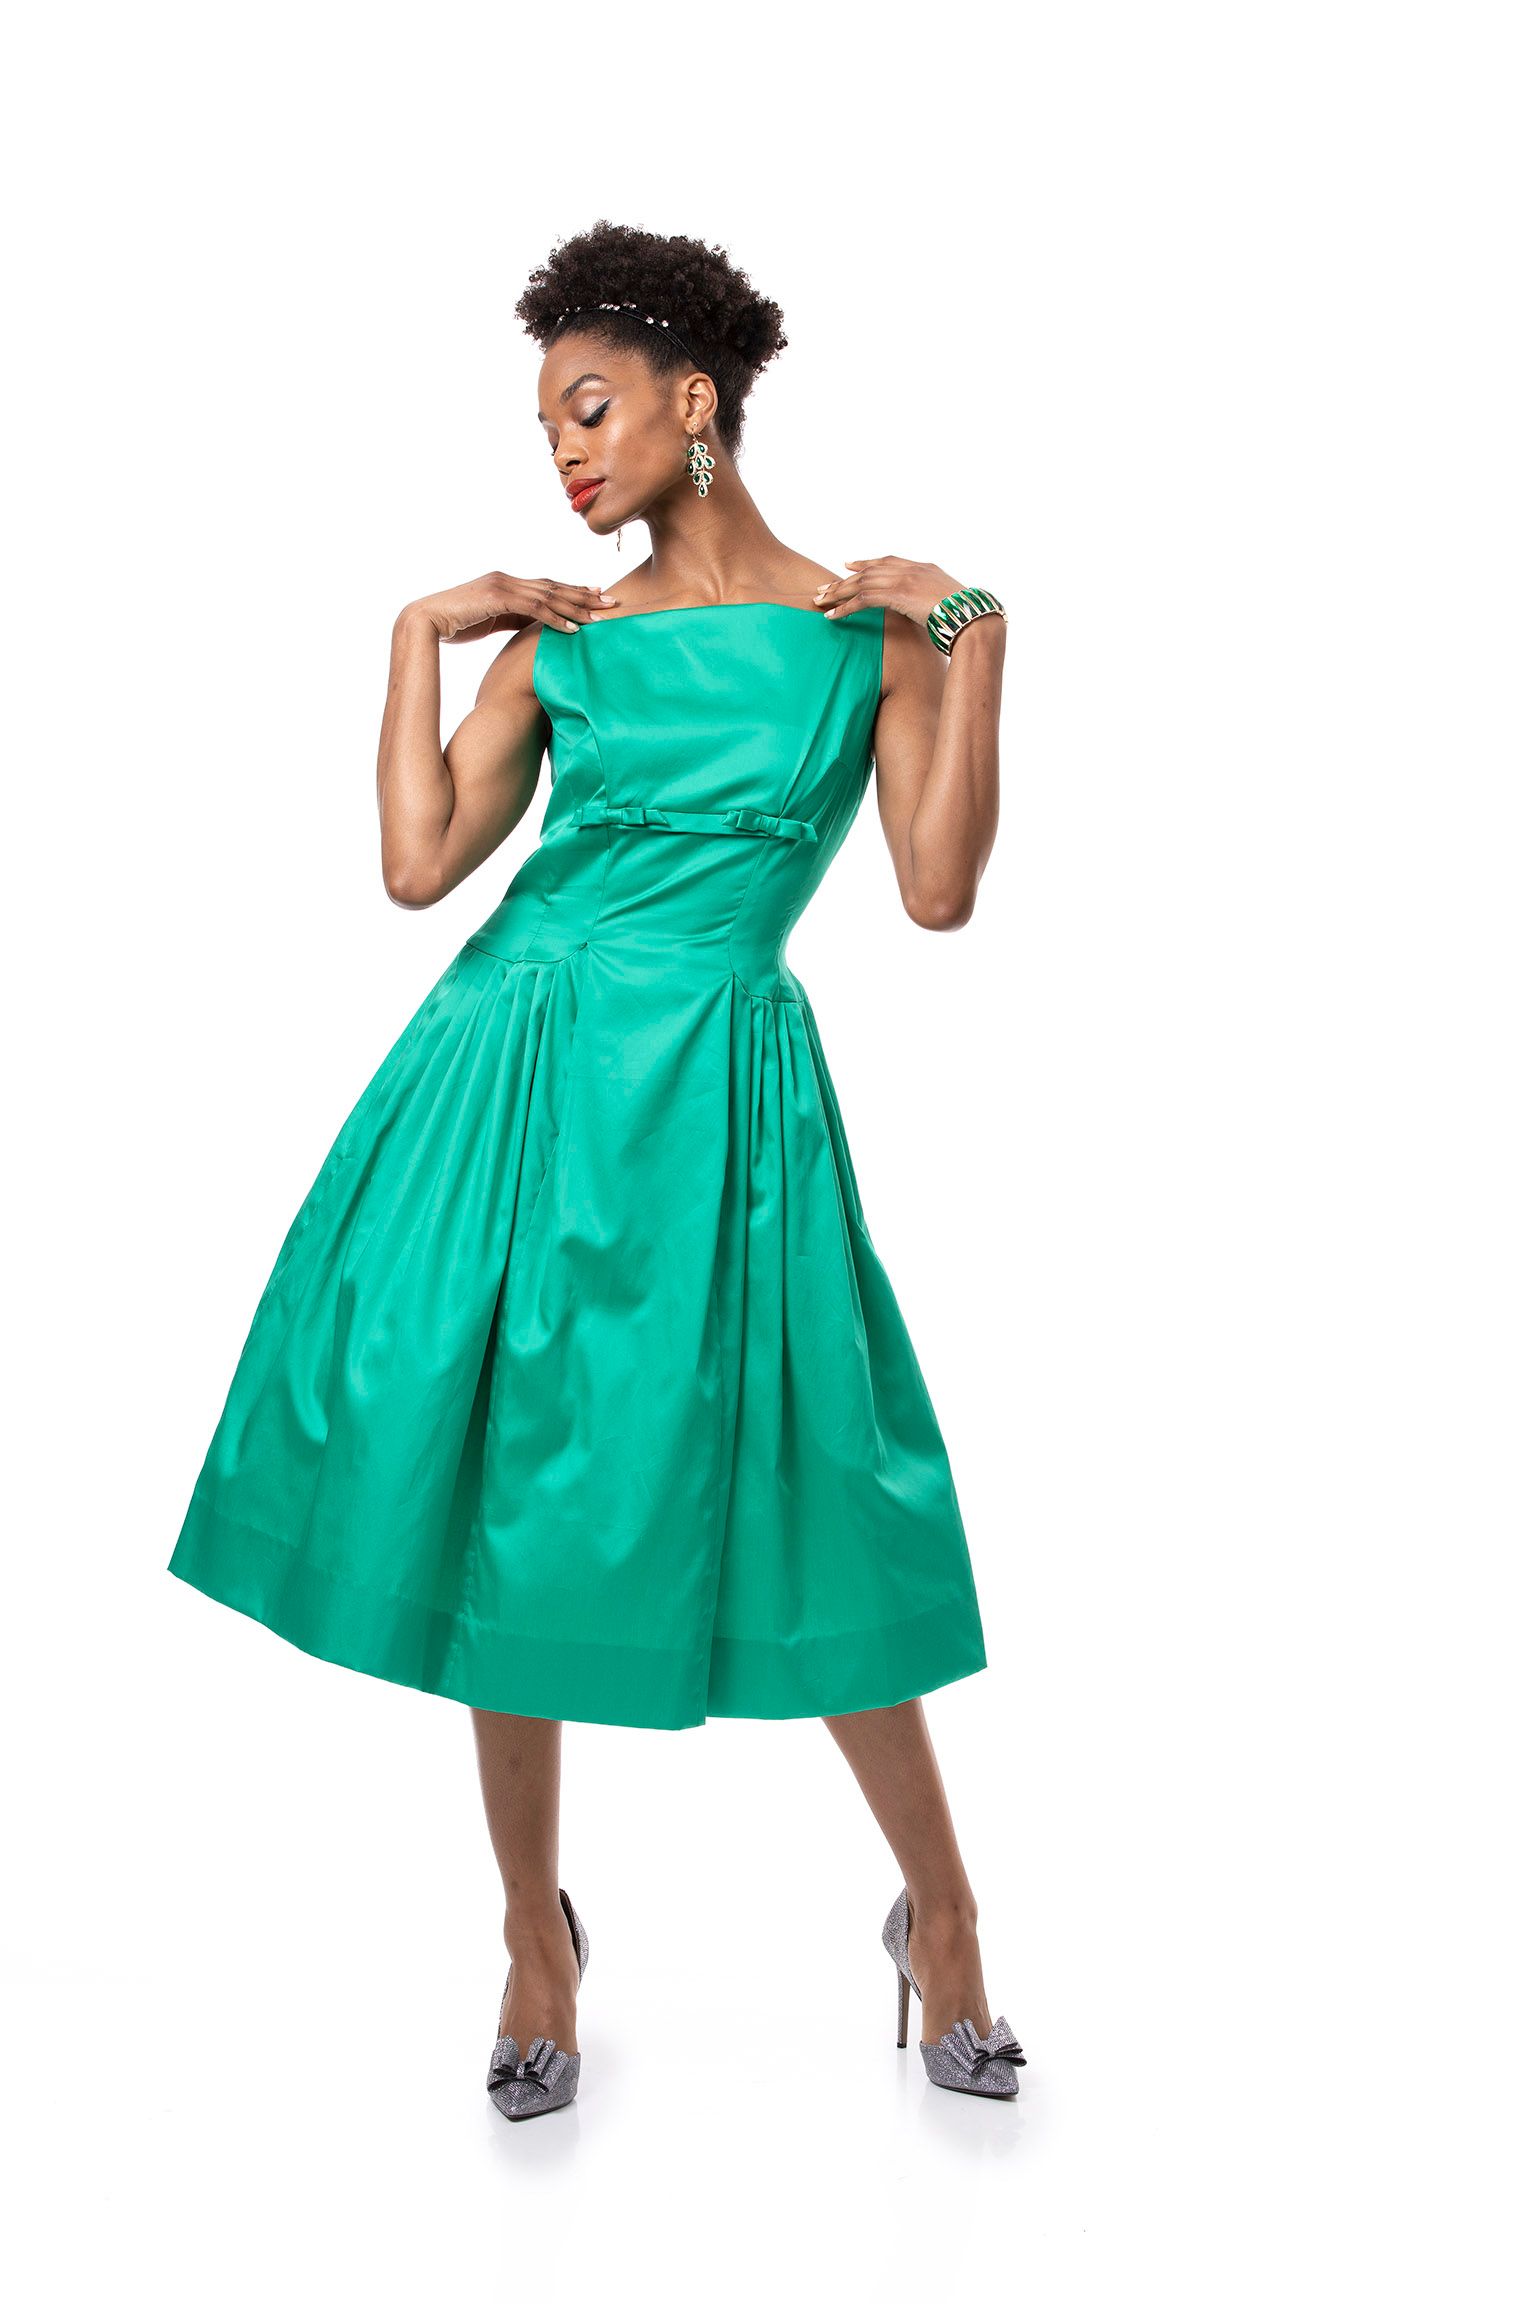 A Contemporary Make of a 1950’s Party Dress | 360-Degree View